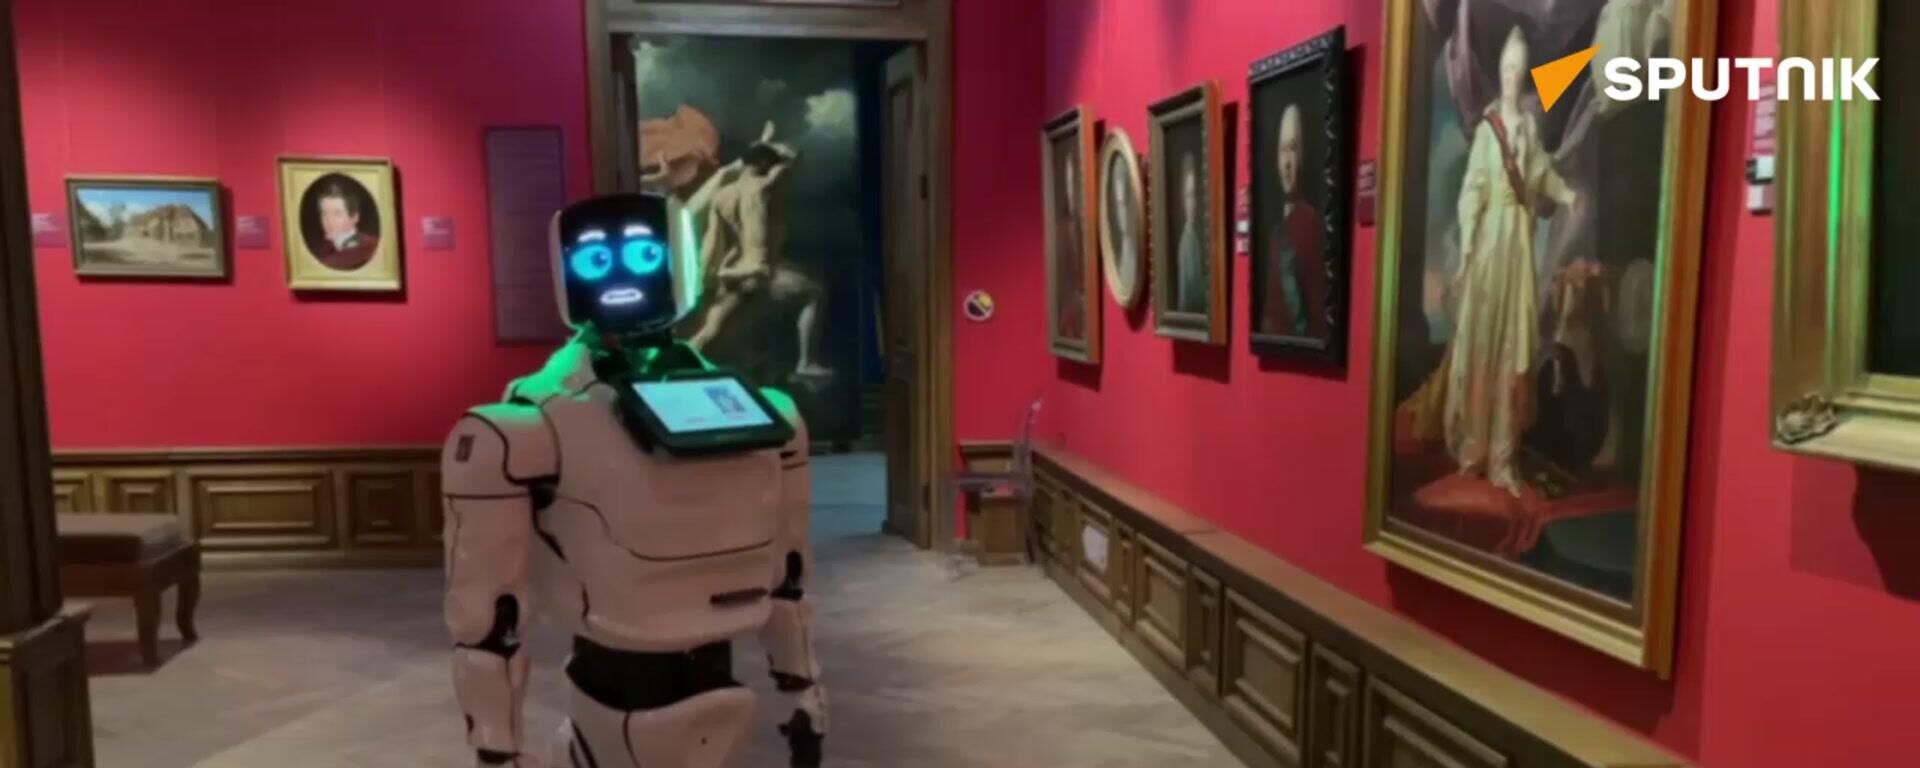 Robot Tour Guide Will Work at Art Gallery in Russia - Sputnik भारत, 1920, 07.04.2023